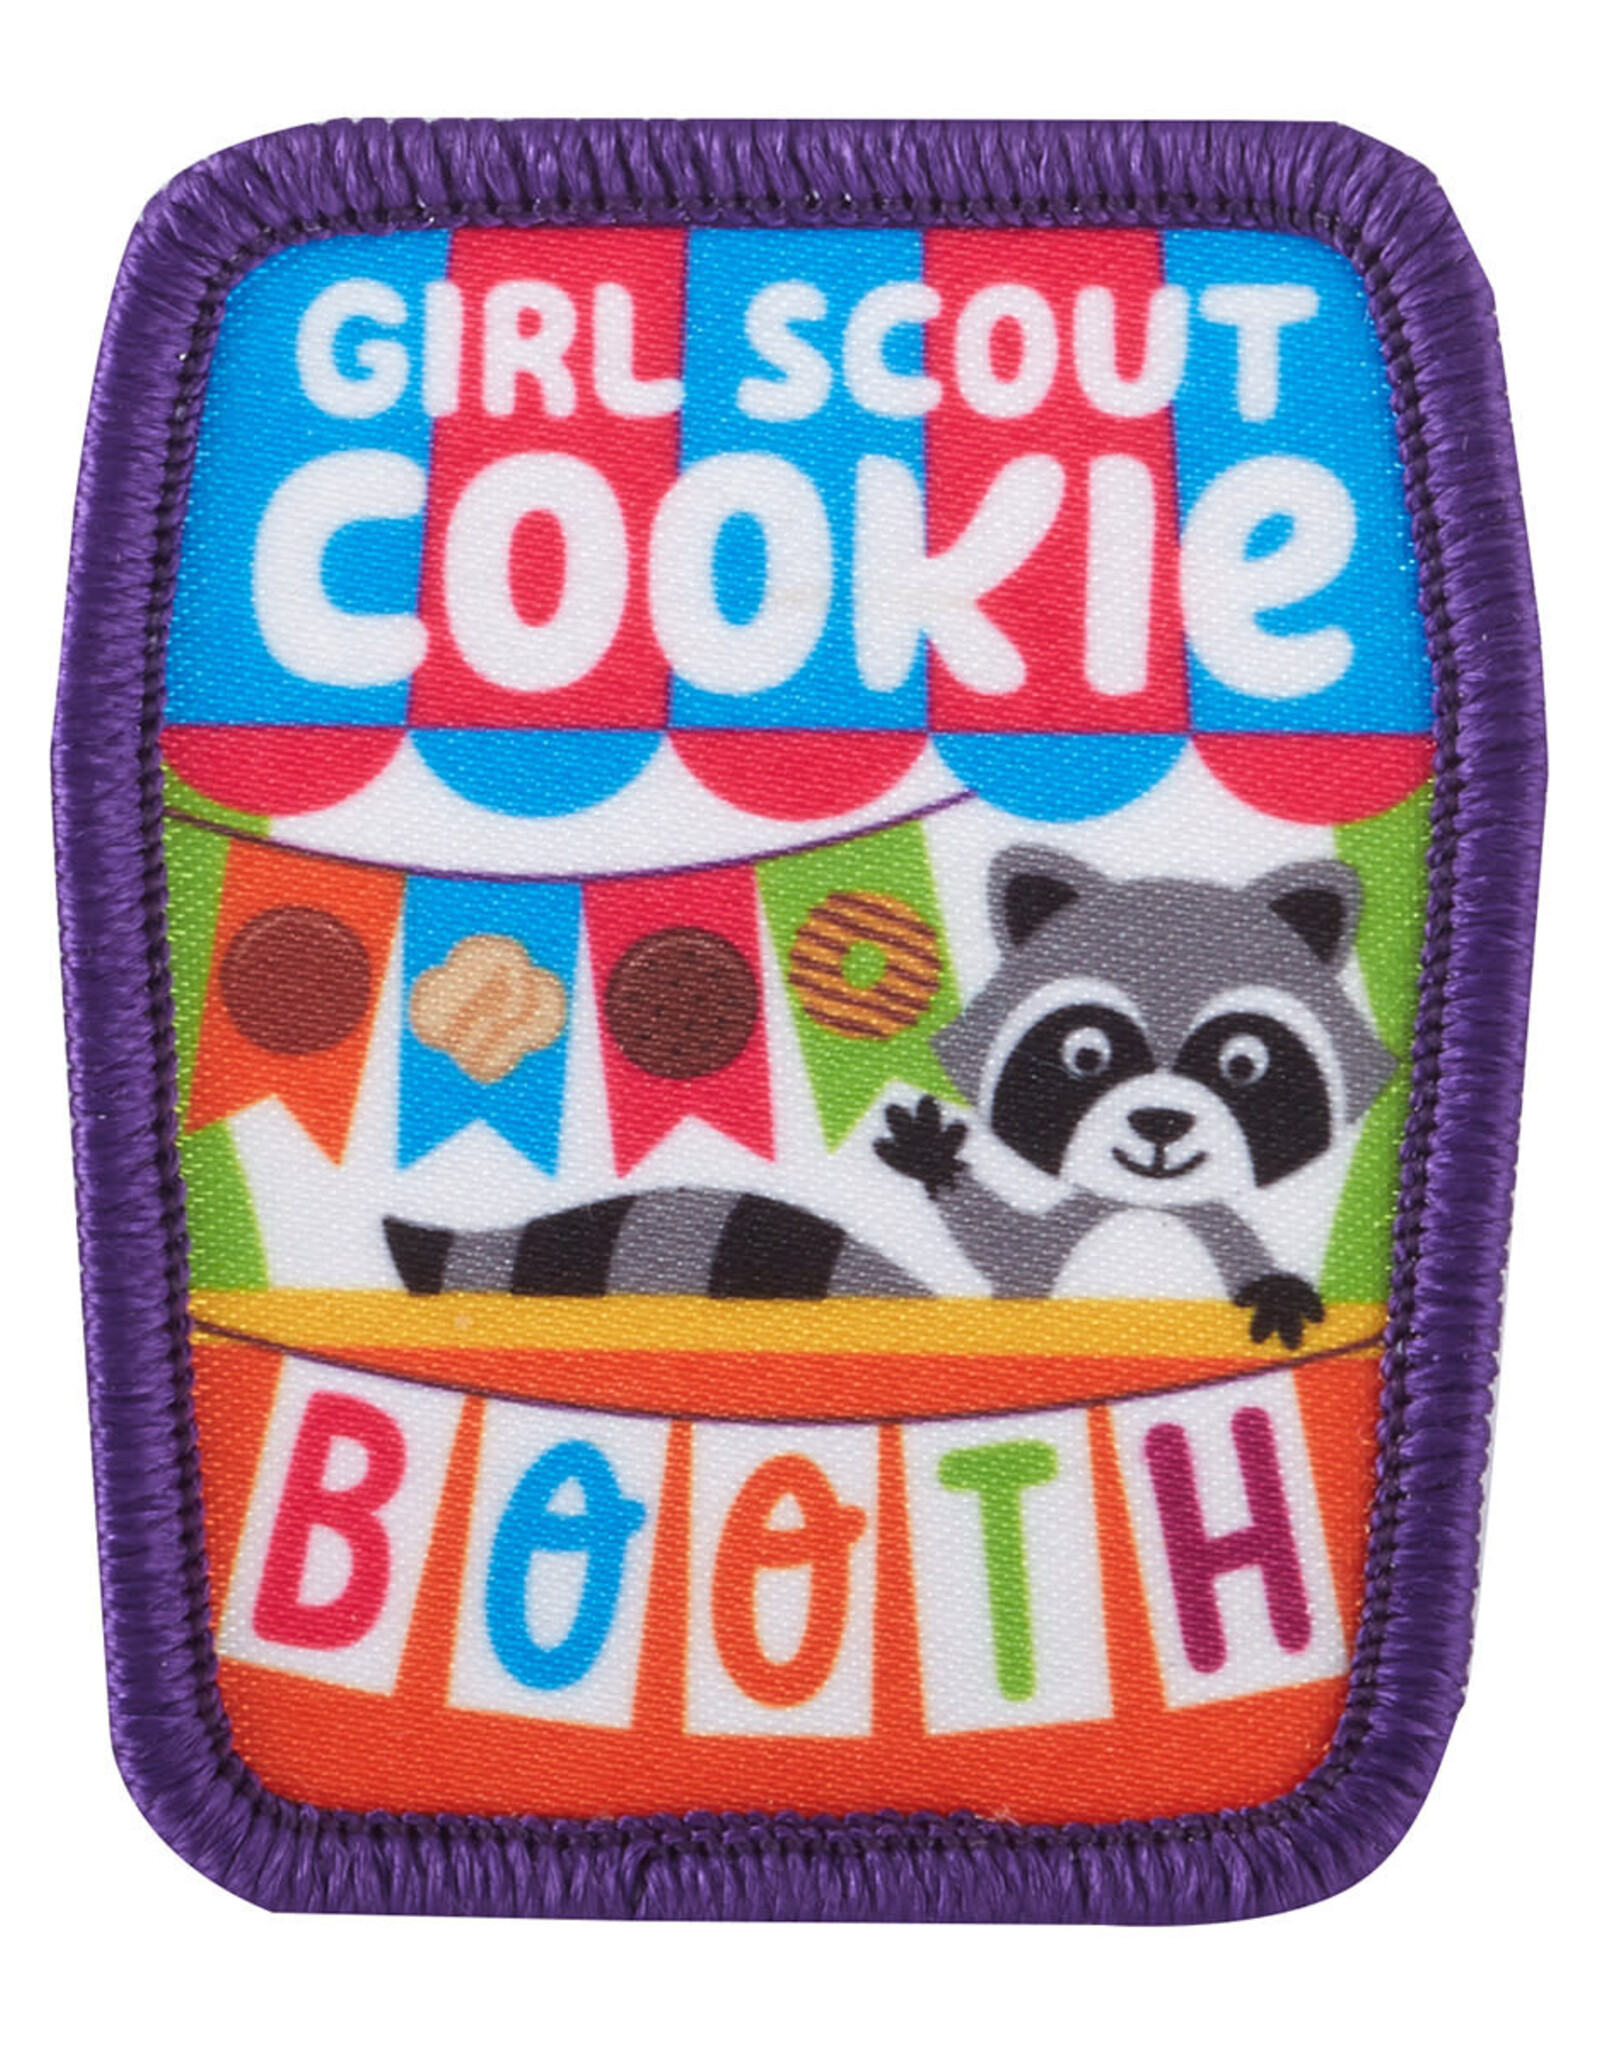 GSUSA Girl Scout Cookie Booth w/Racoon Sew-On Patch